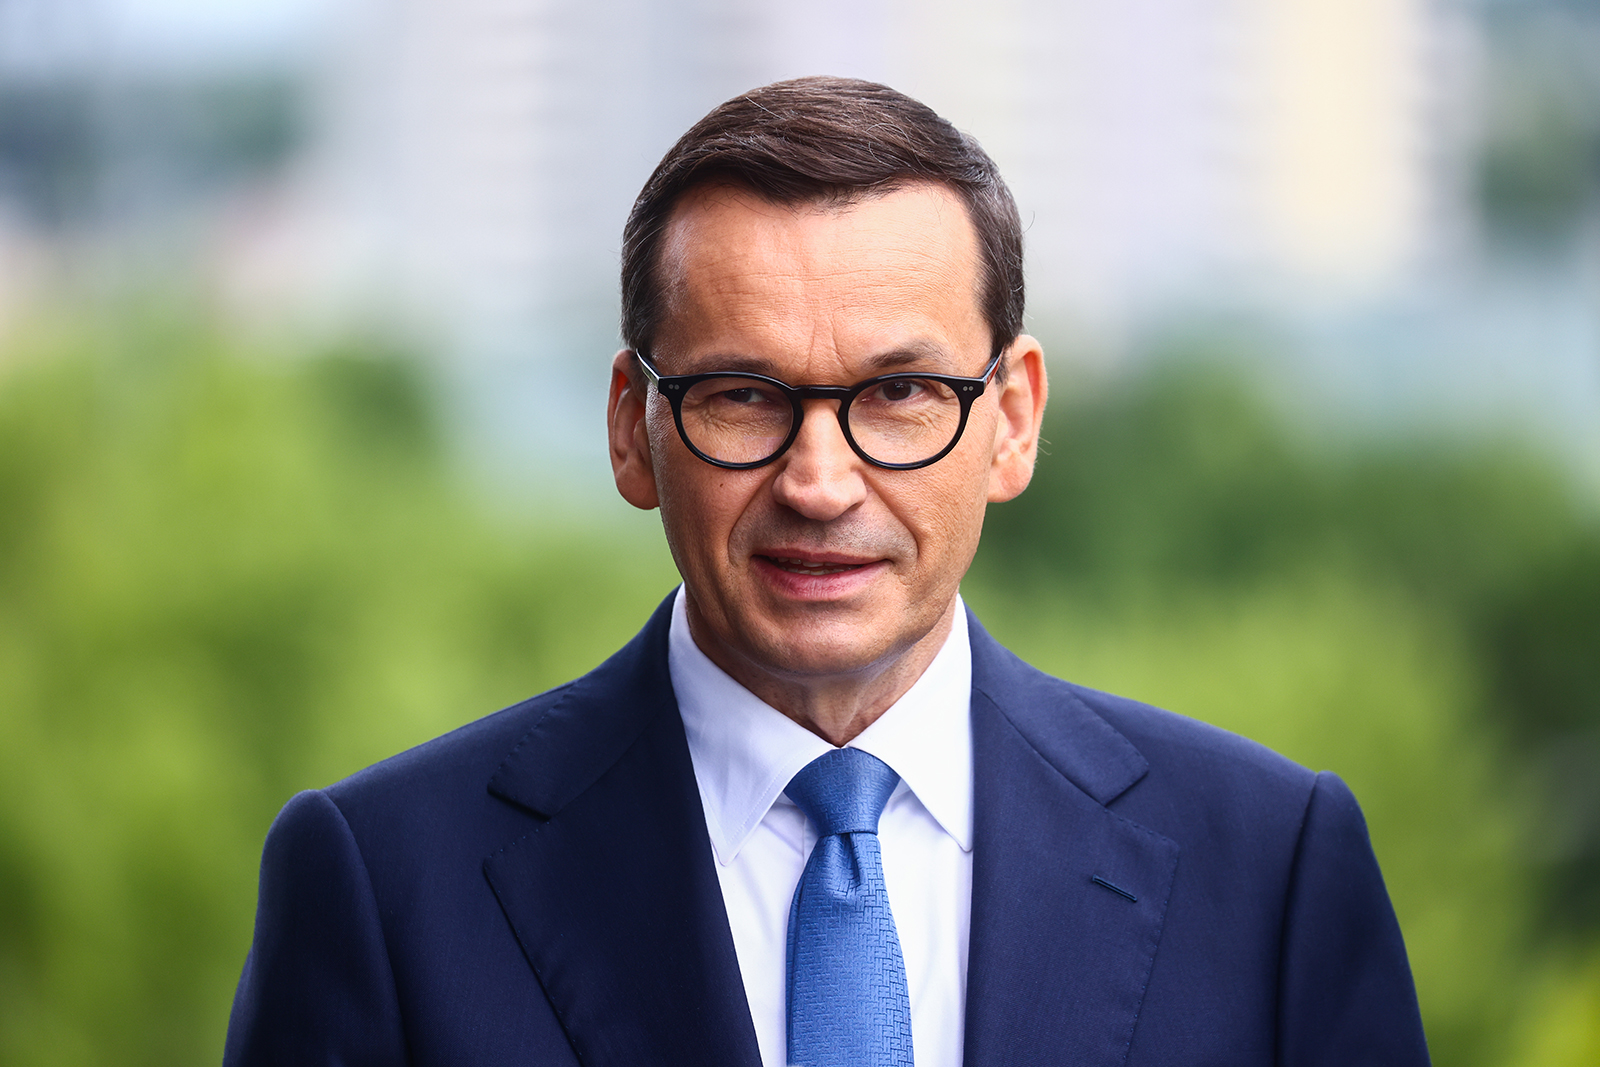 Mateusz Morawiecki attends a press conference in Katowice, Poland on July 20.